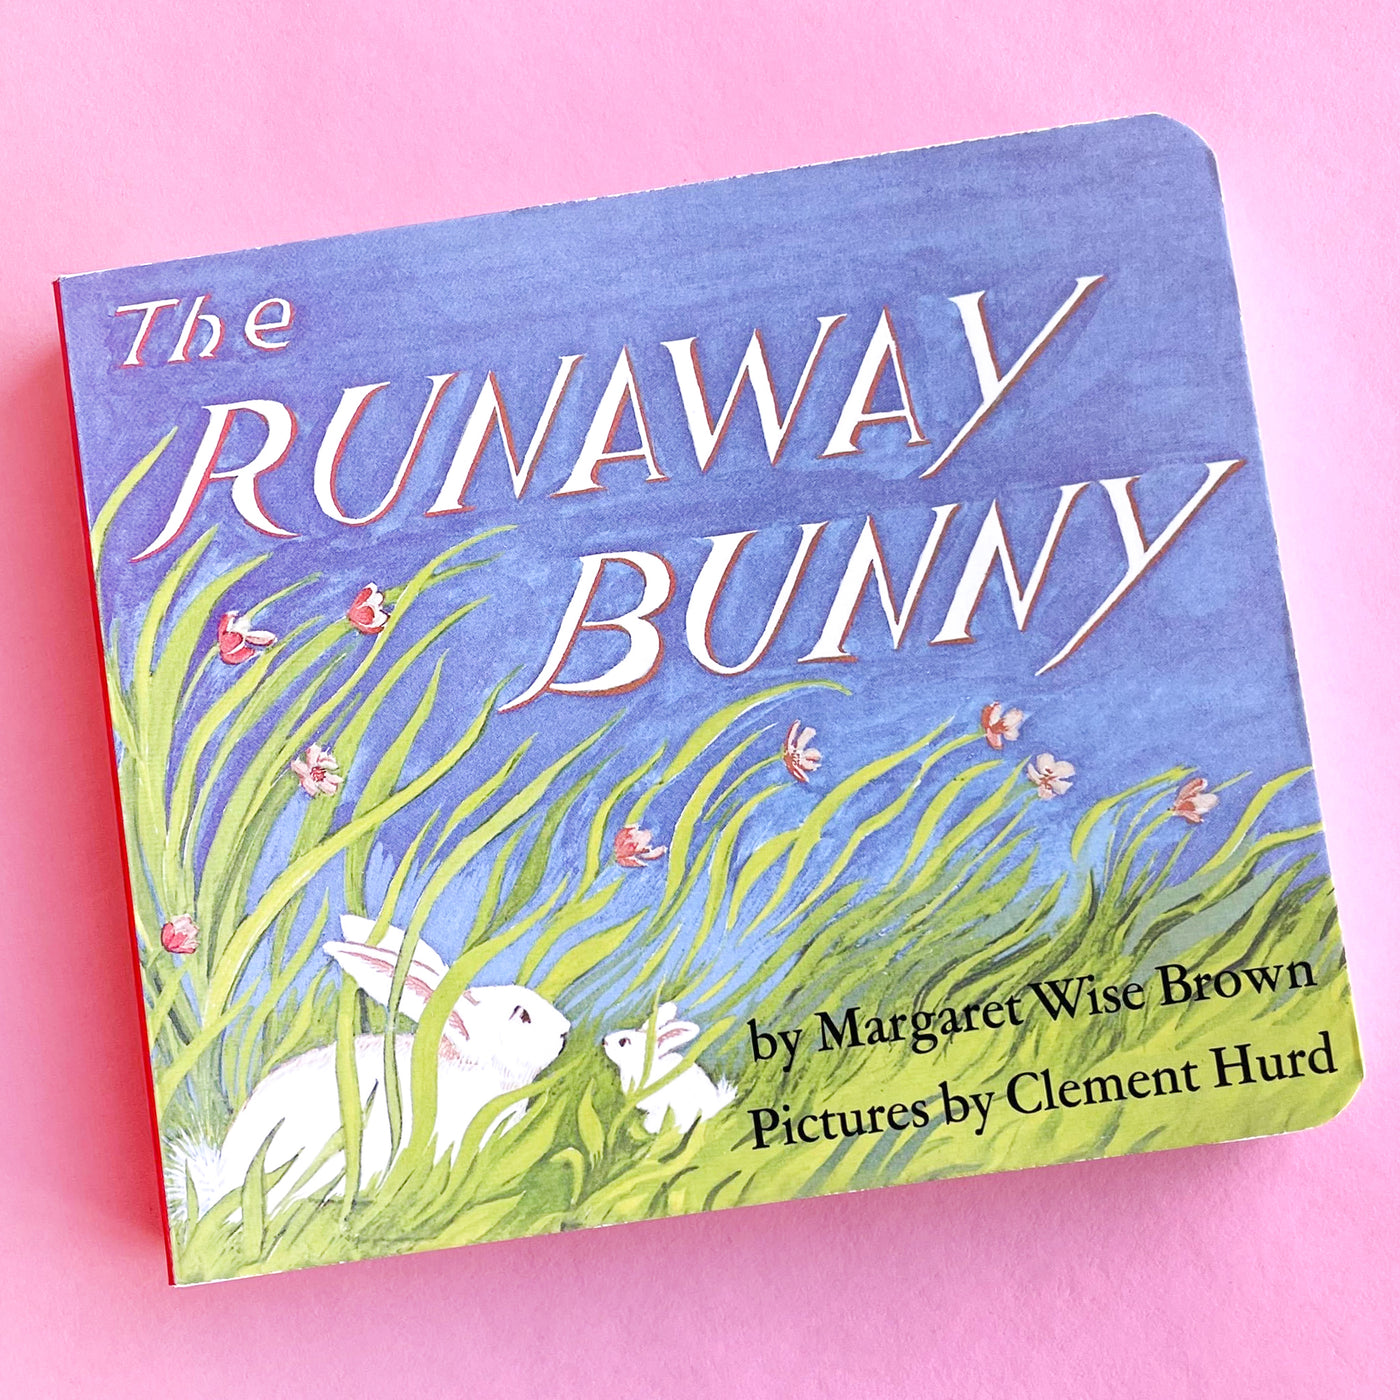 The Runaway Bunny by Margaret Wise Brown and Clement Hurd